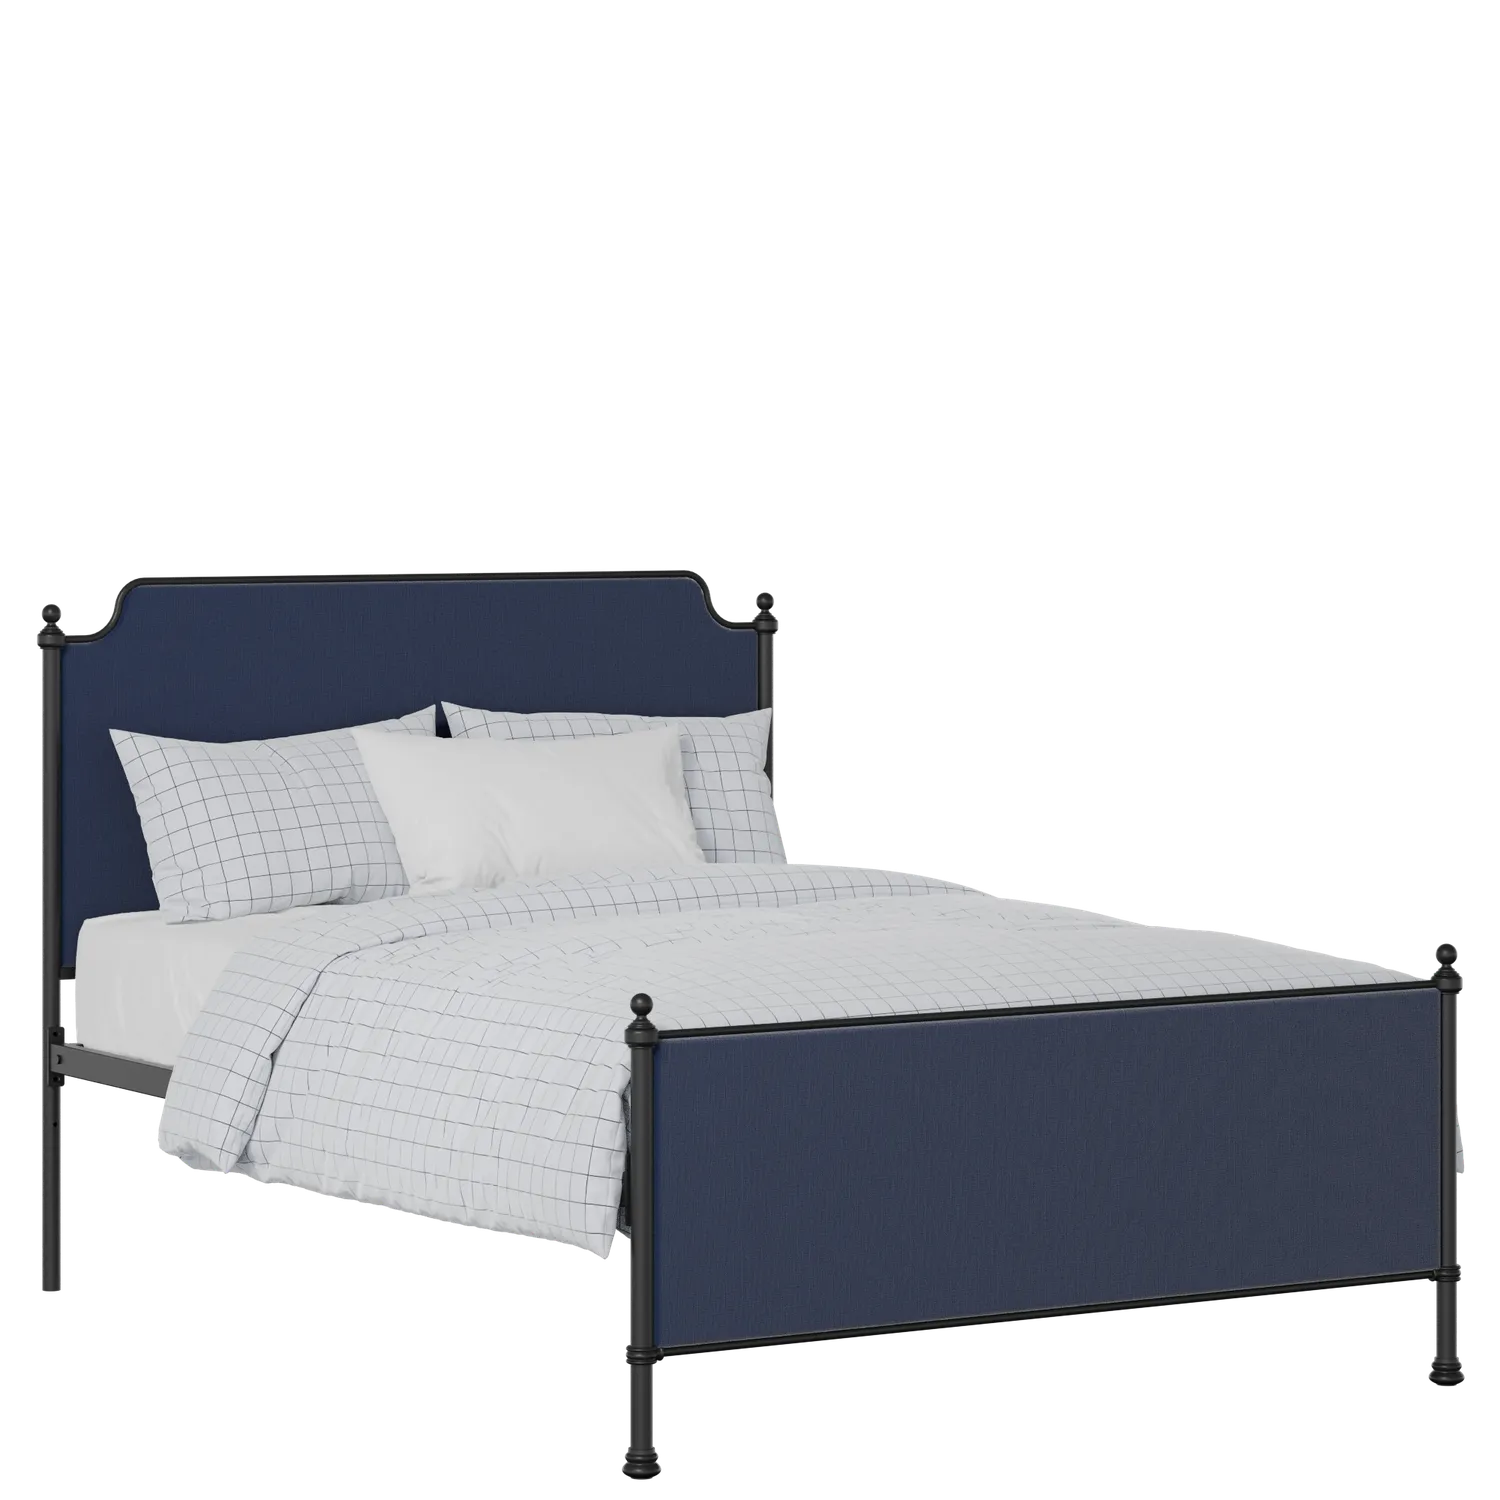 Miranda iron/metal upholstered bed in black with blue fabric